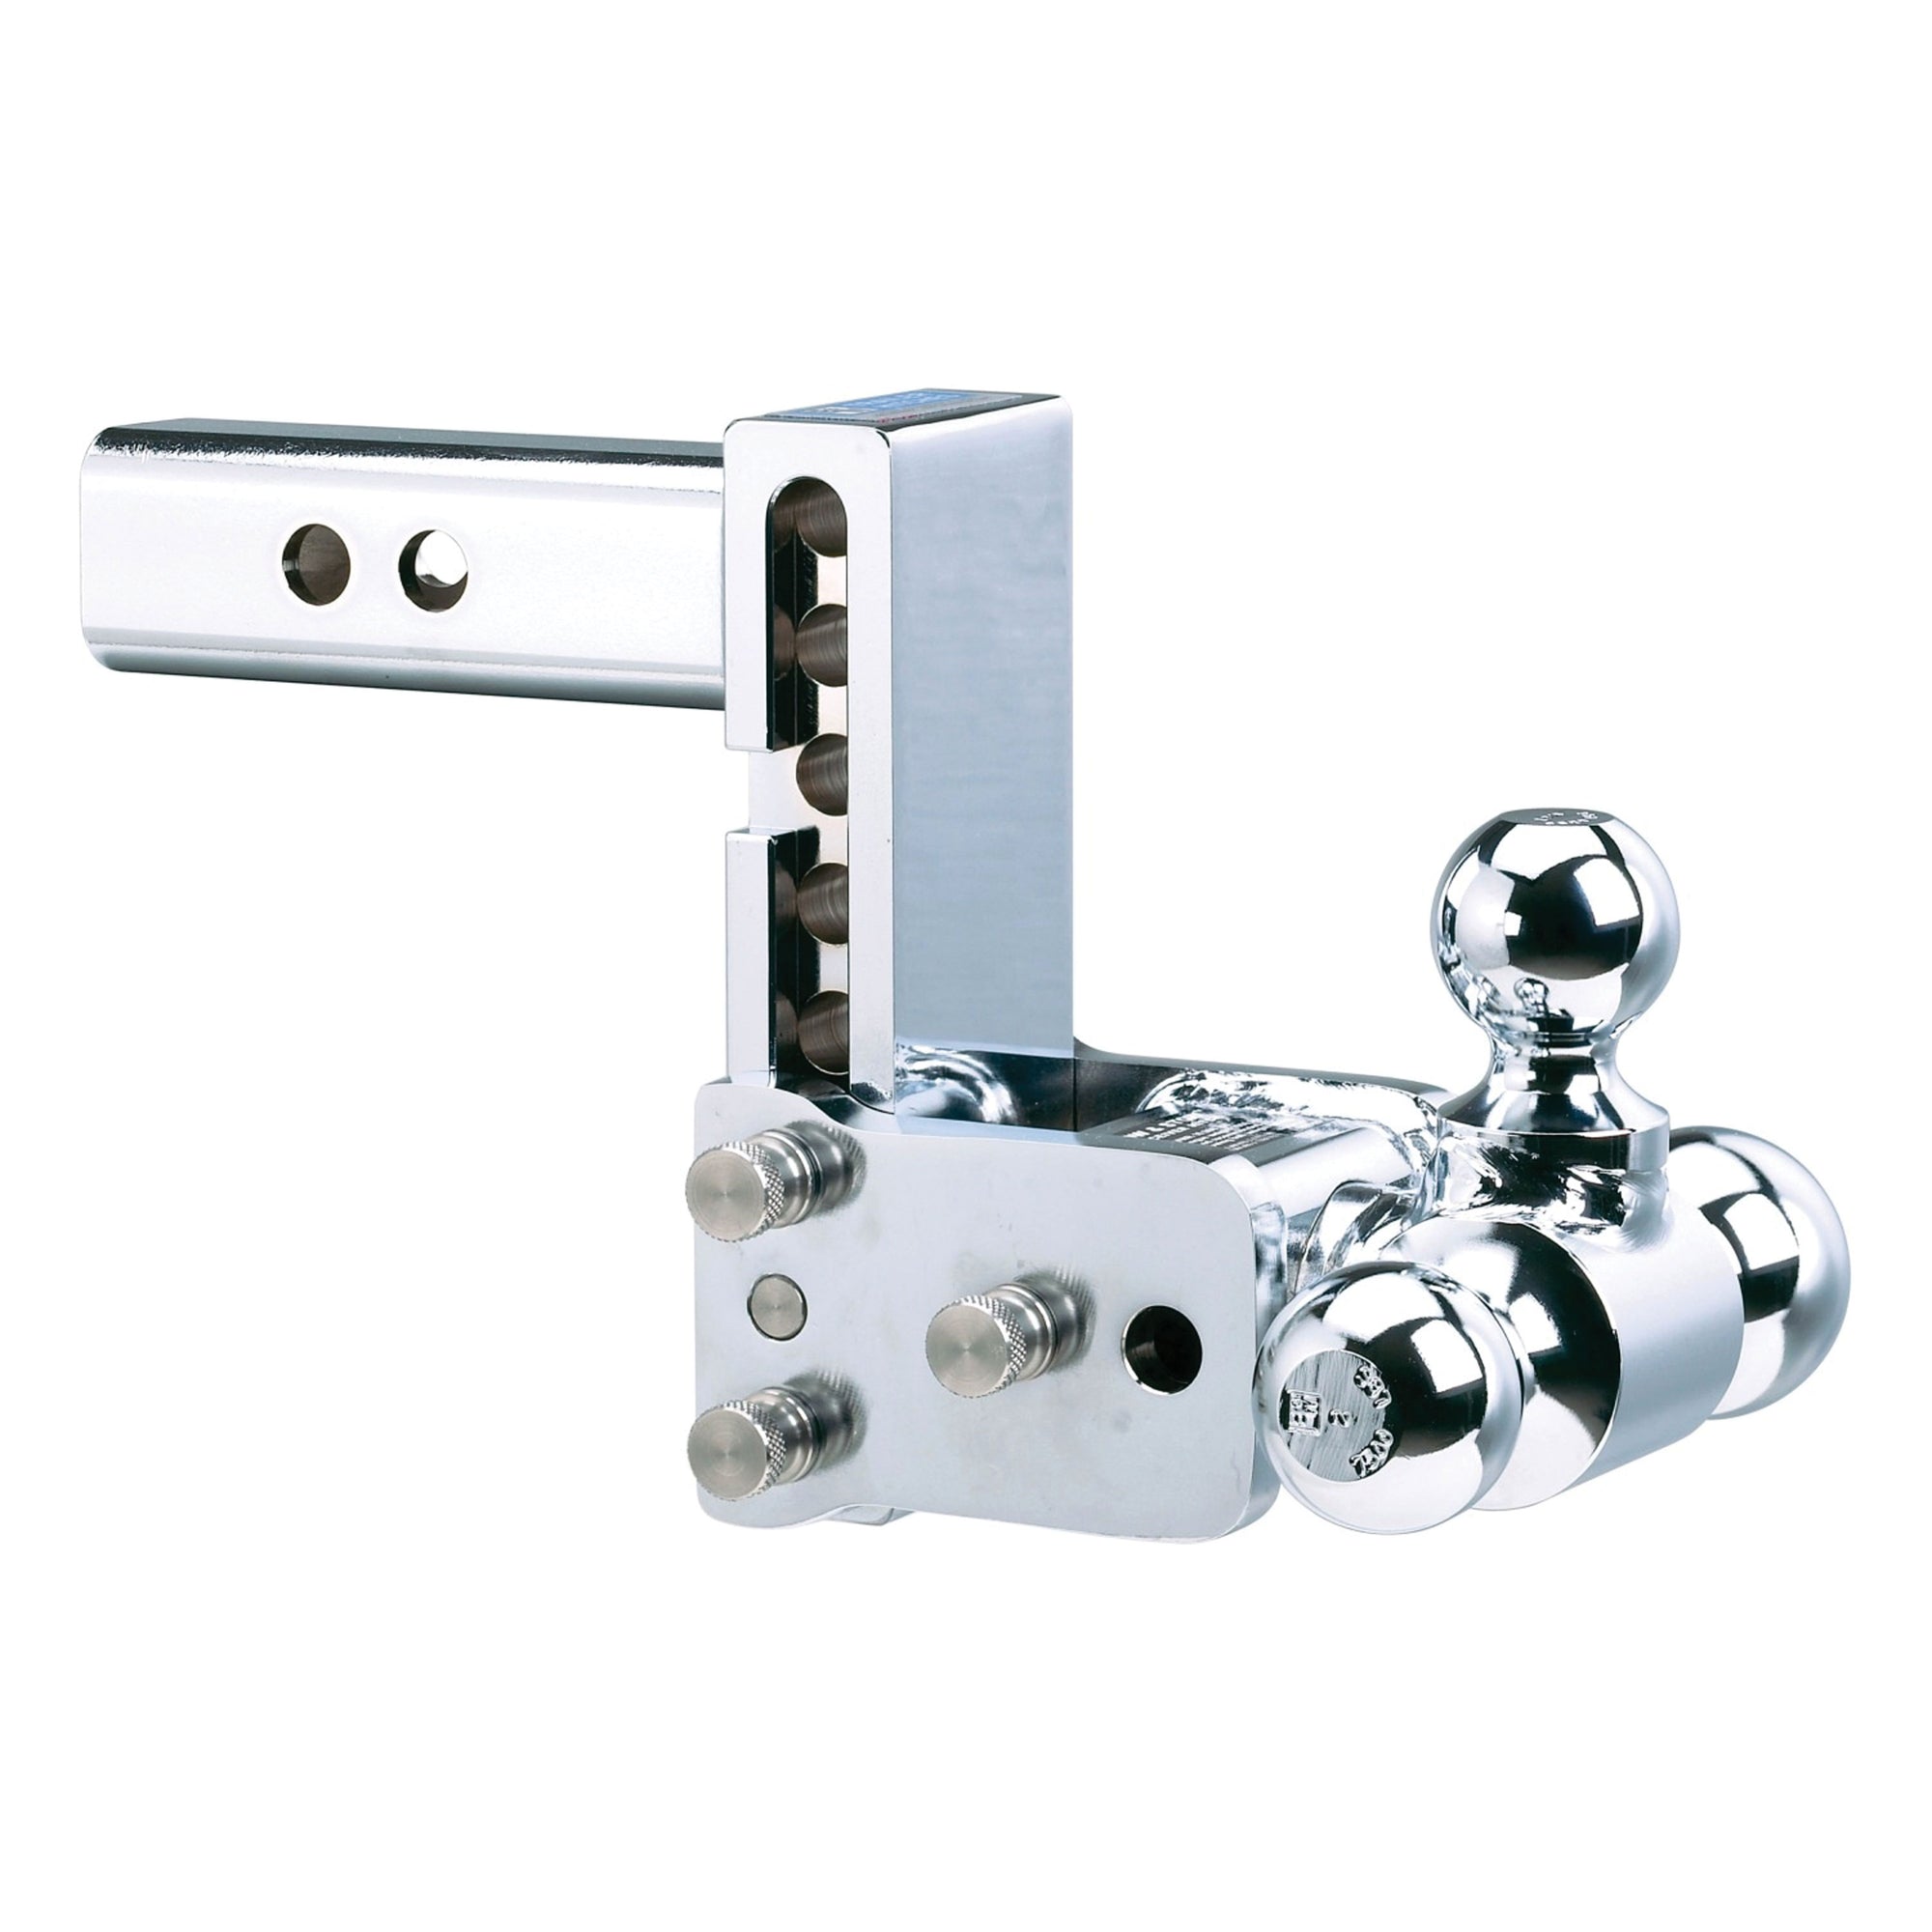 B&W Trailer Hitches TS10047C Tow and Stow Adjustable Ball Mount - 1-7/8", 2" & 2-5/16" Ball, 3" Drop, 3.5" Rise, Chrome